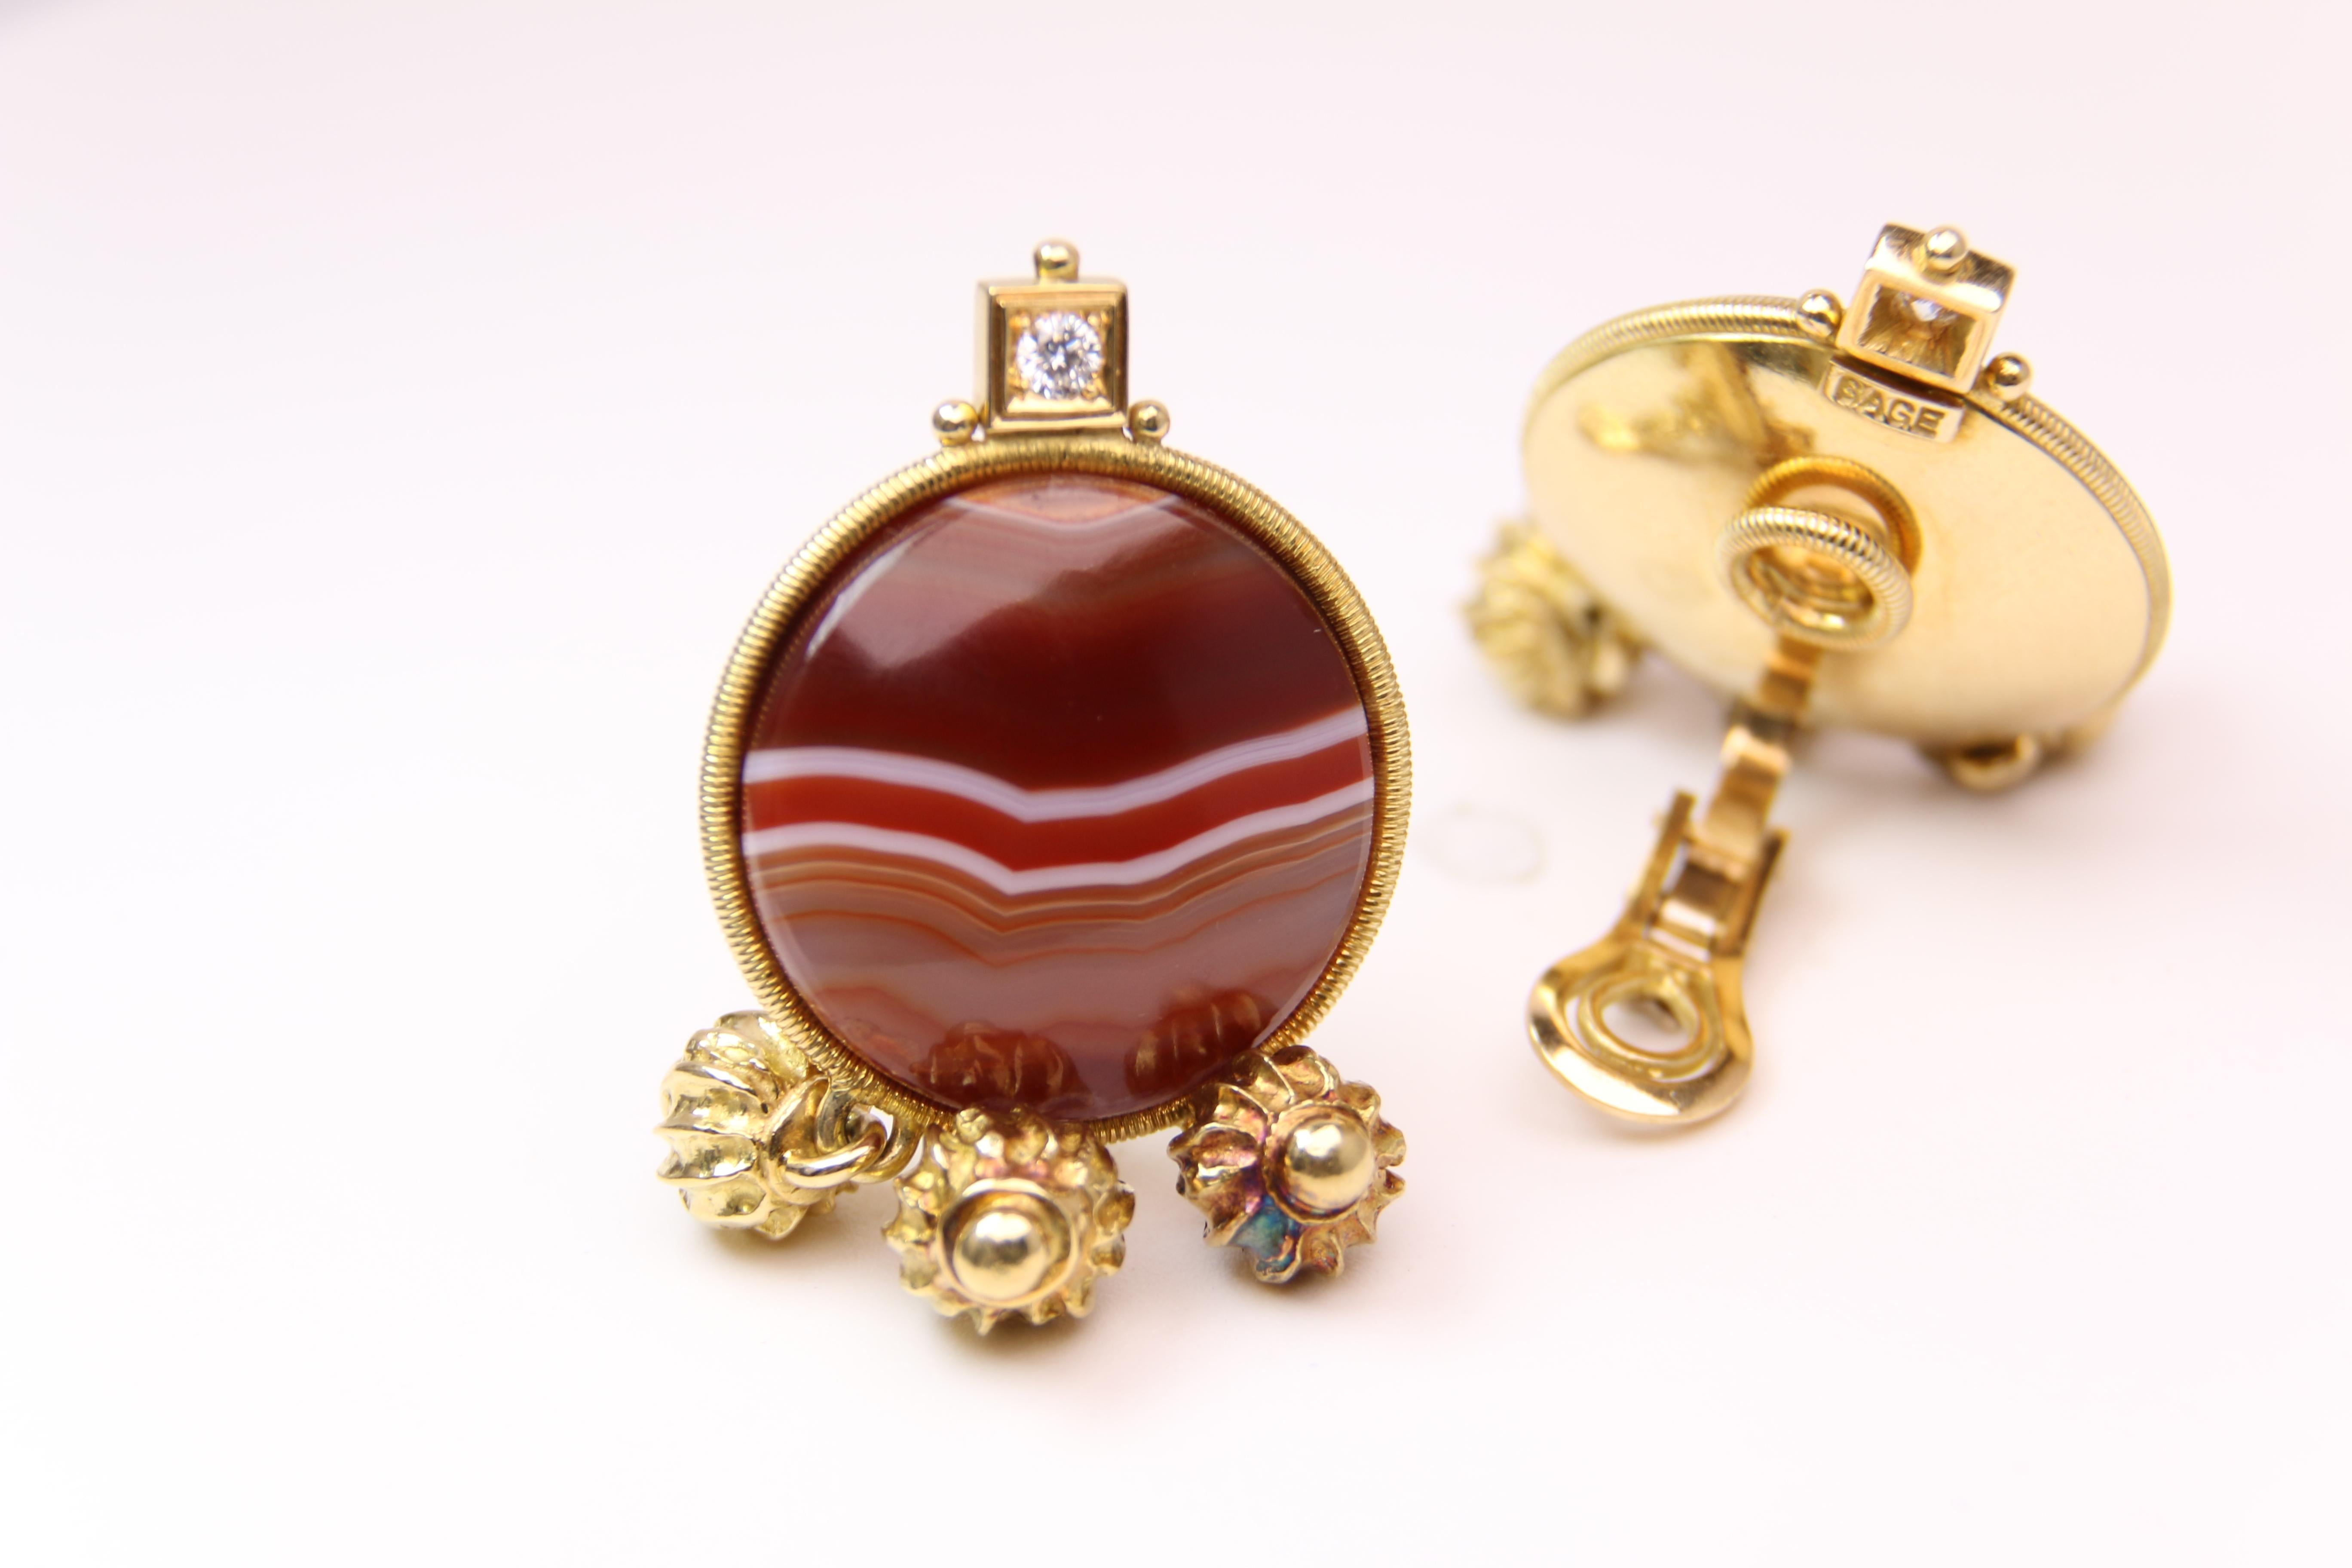 These stunning 18k Yellow gold and Carnelian Diamond Clip on Earrings from Elizabeth Gage weigh in at 43.9g. Earrings are marked Gage 750
Each earring features 1 round Diamond
The earrings measure 1.75 inches in length and 1 inch in width.
